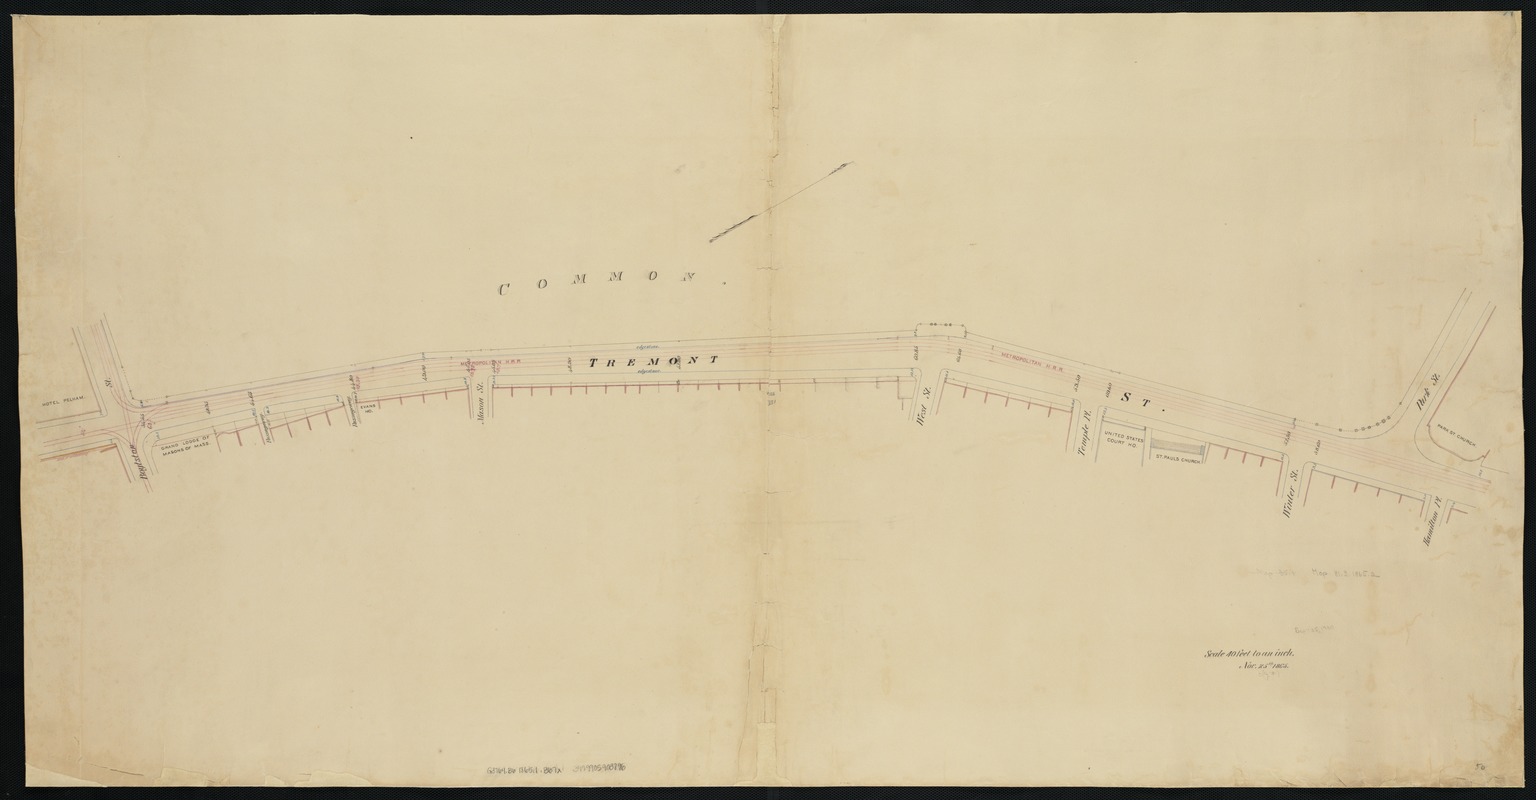 [Plan of Tremont Street from Park to Boylston]